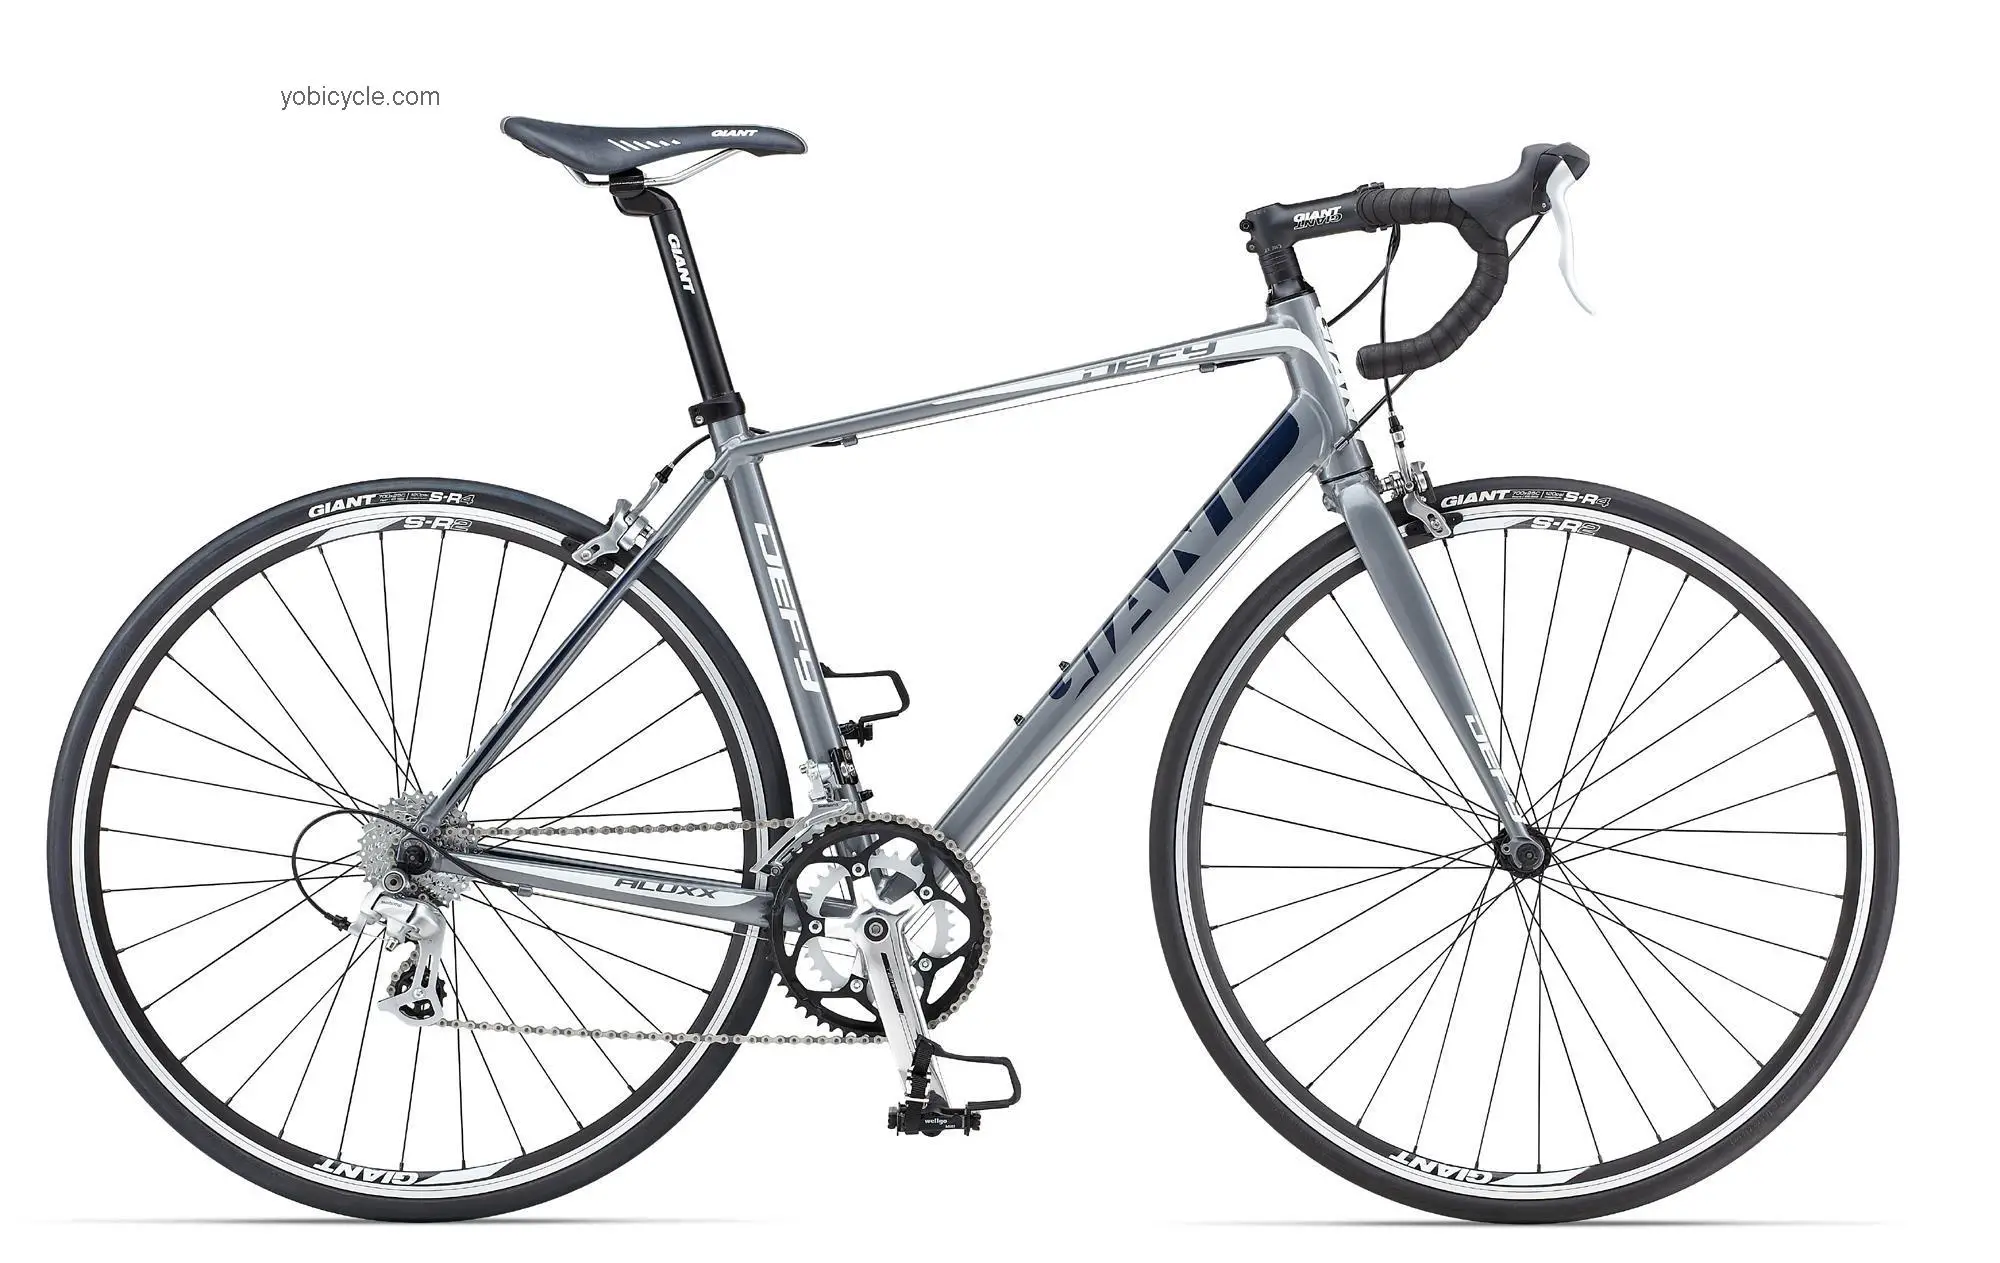 Giant Defy 5 2013 comparison online with competitors